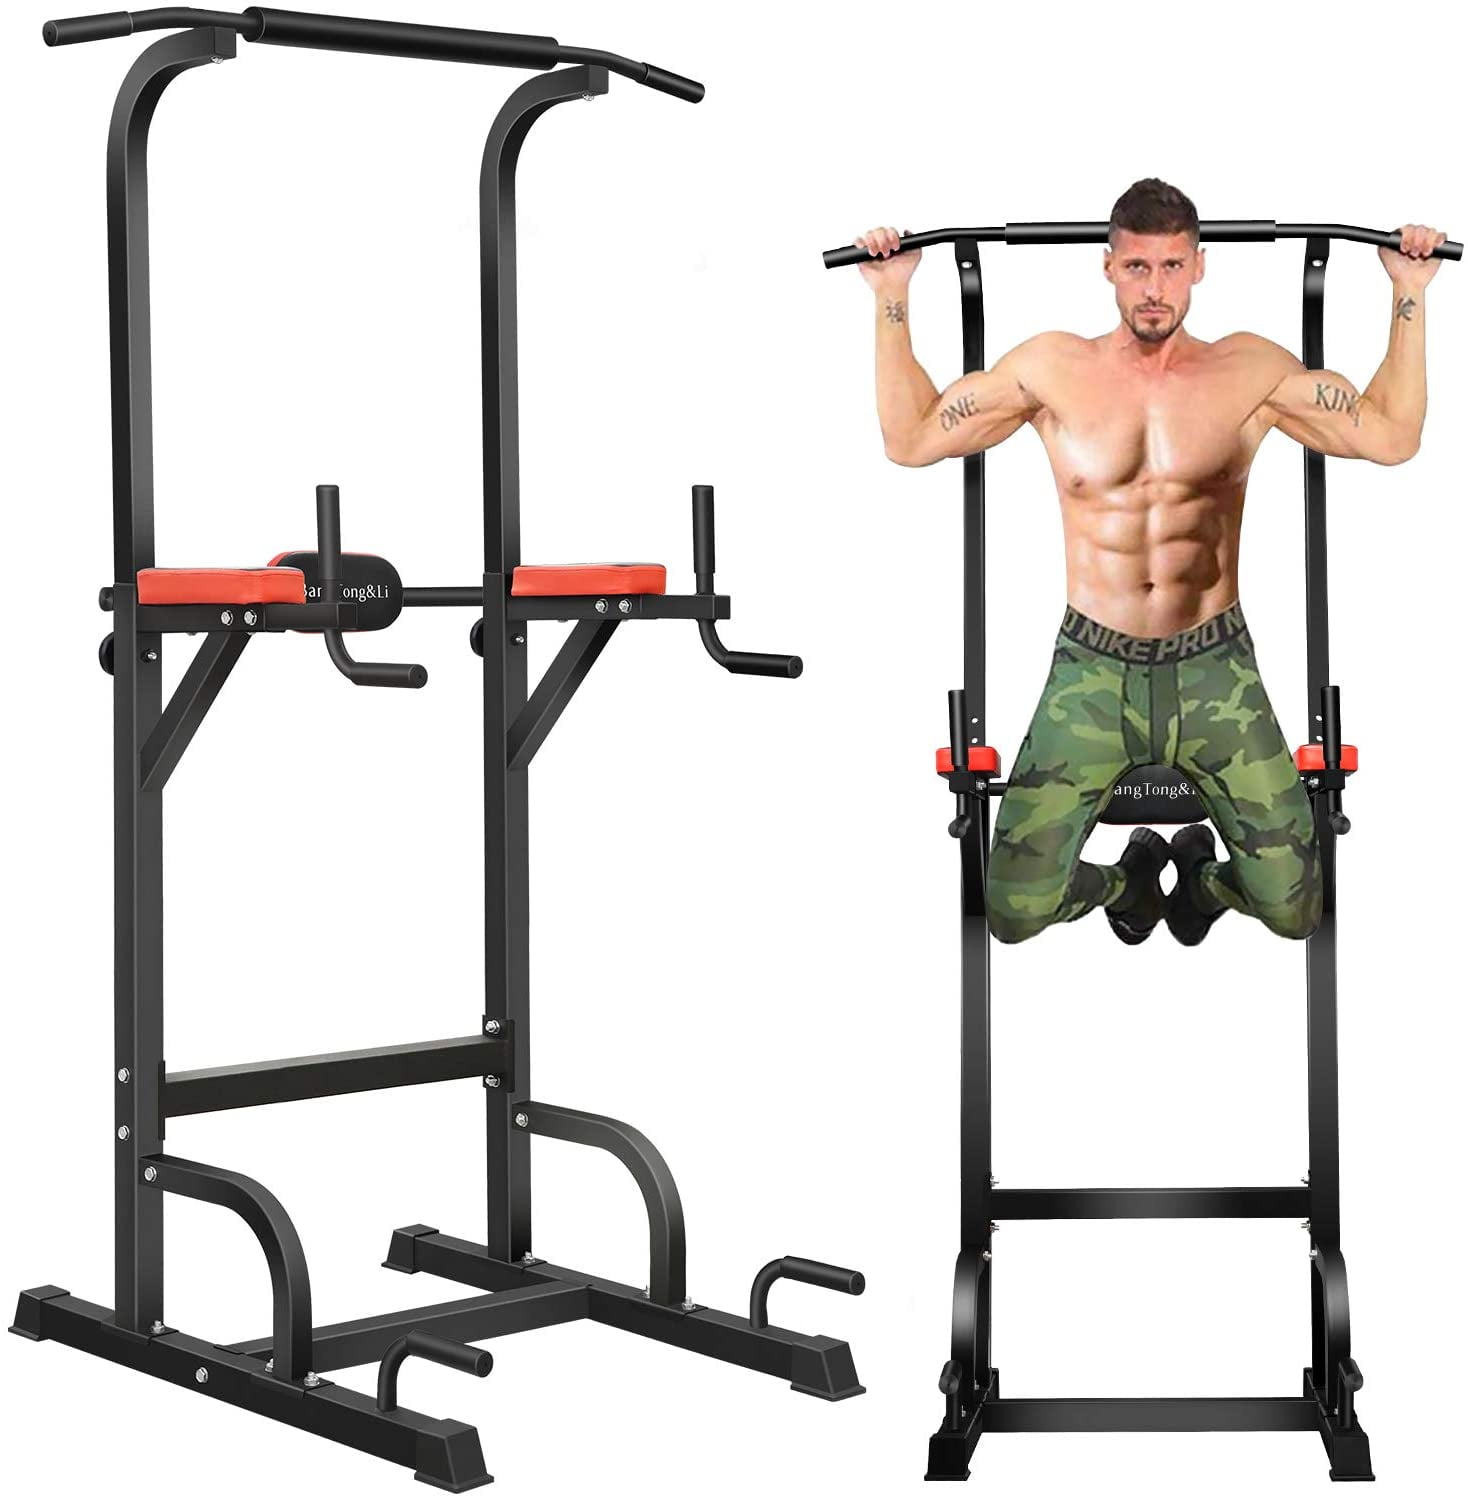 Power Tower Workout Pull Up & Dip Station Adjustable Multi-Function Home Fitness